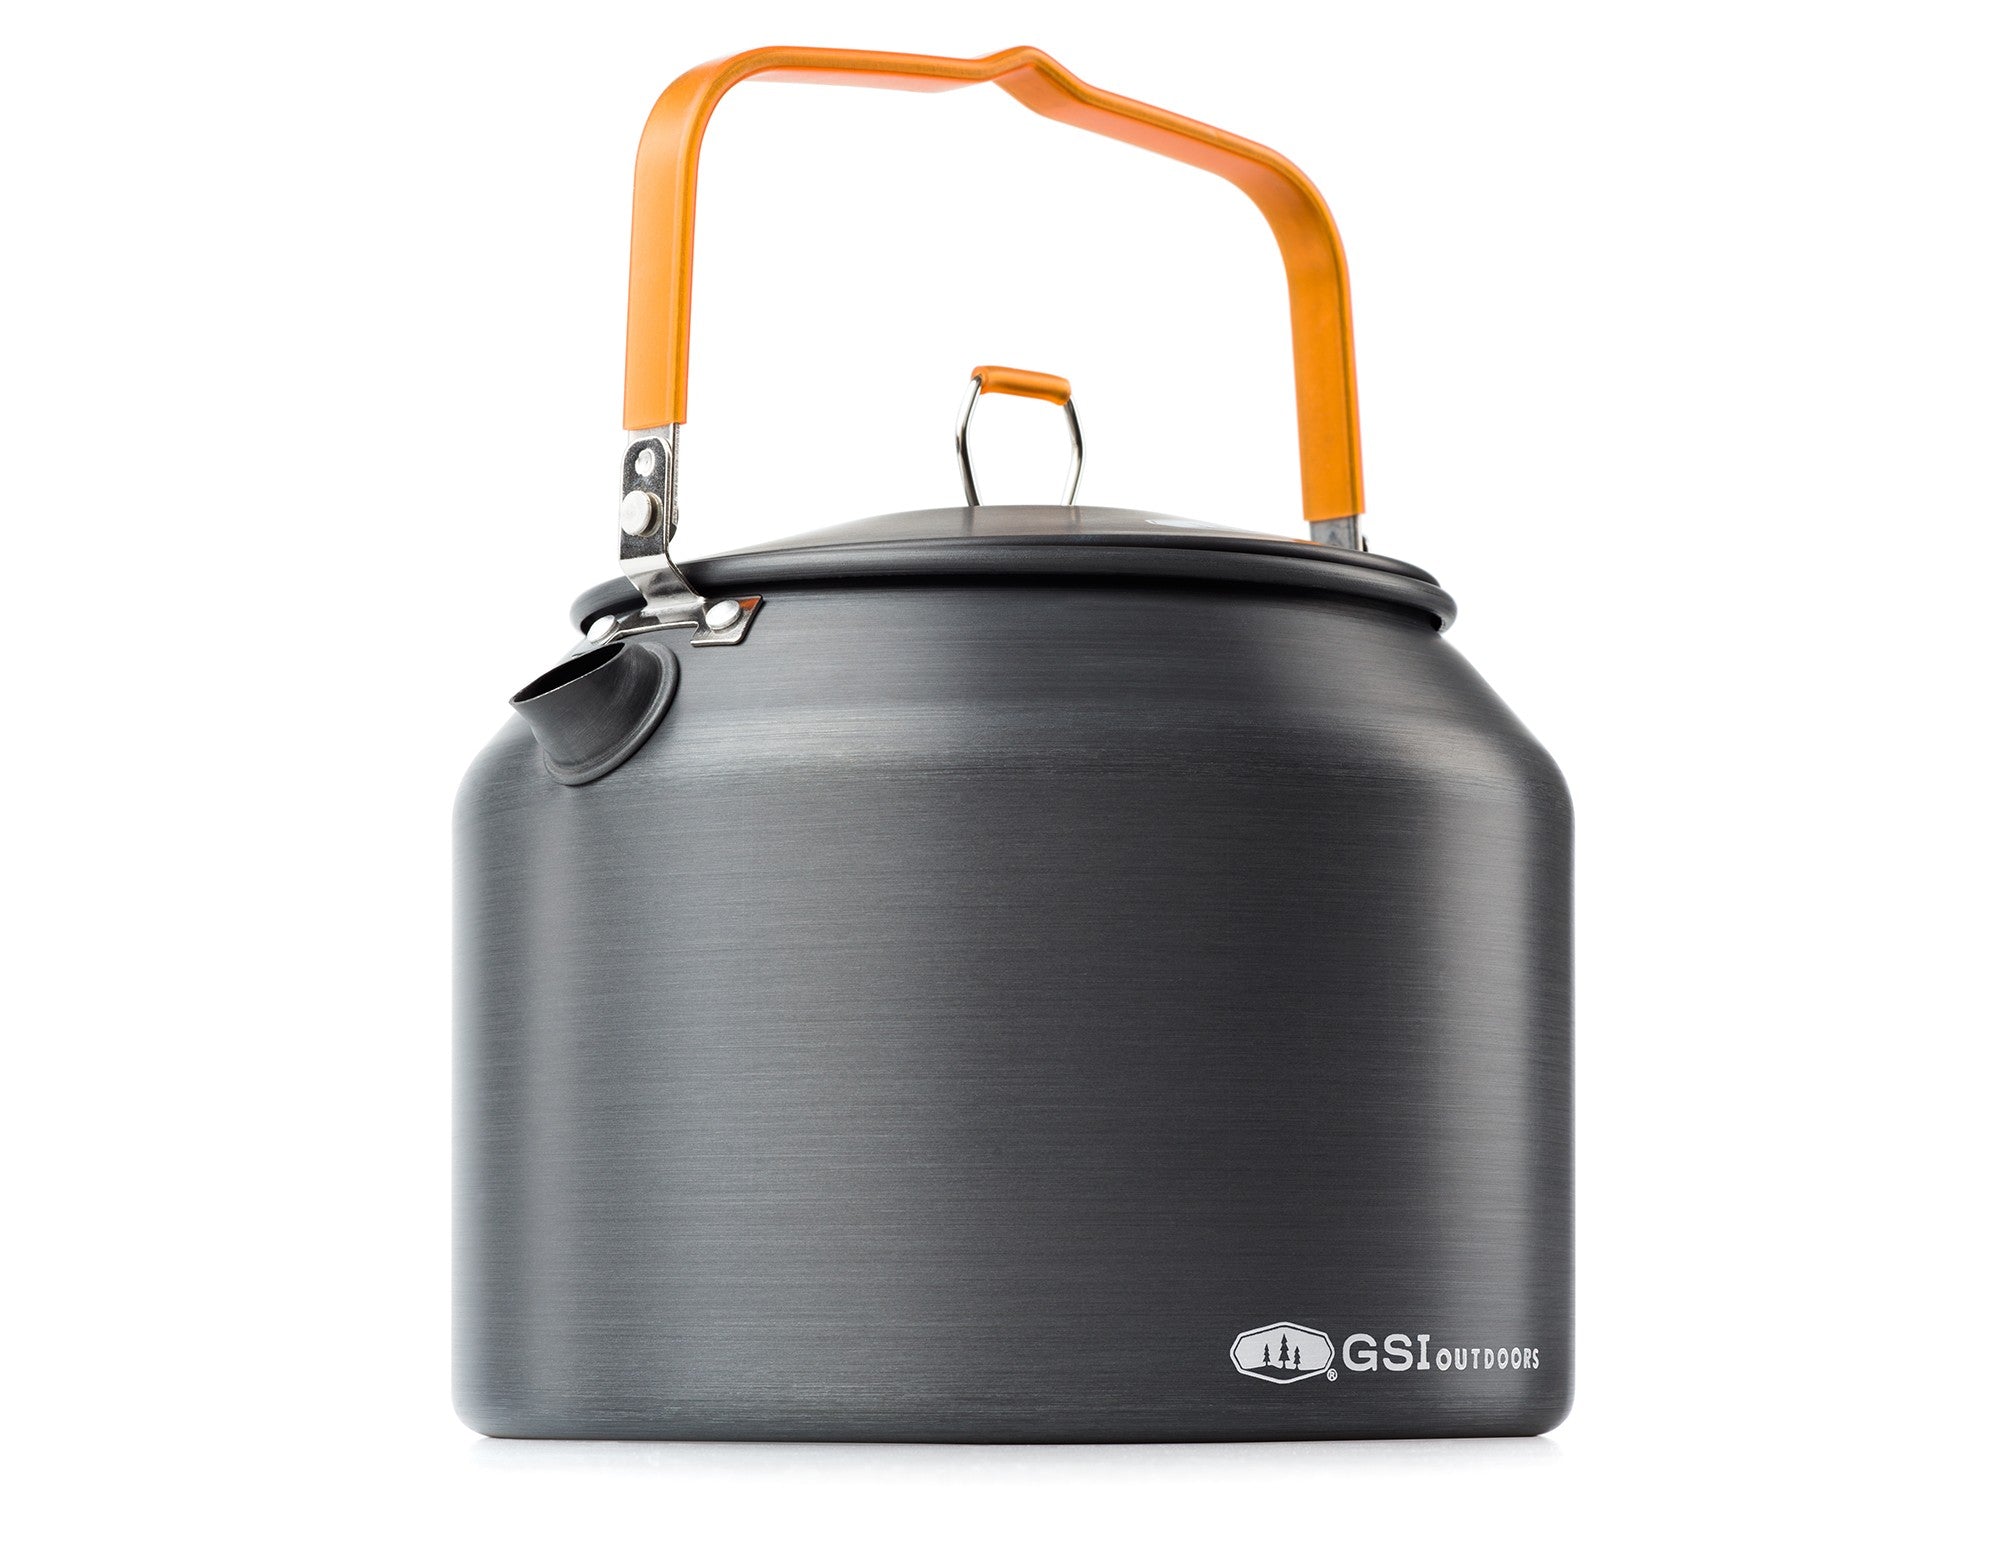 Stainless Steel Outdoor Camping Kettle Compact Lightweight Tea